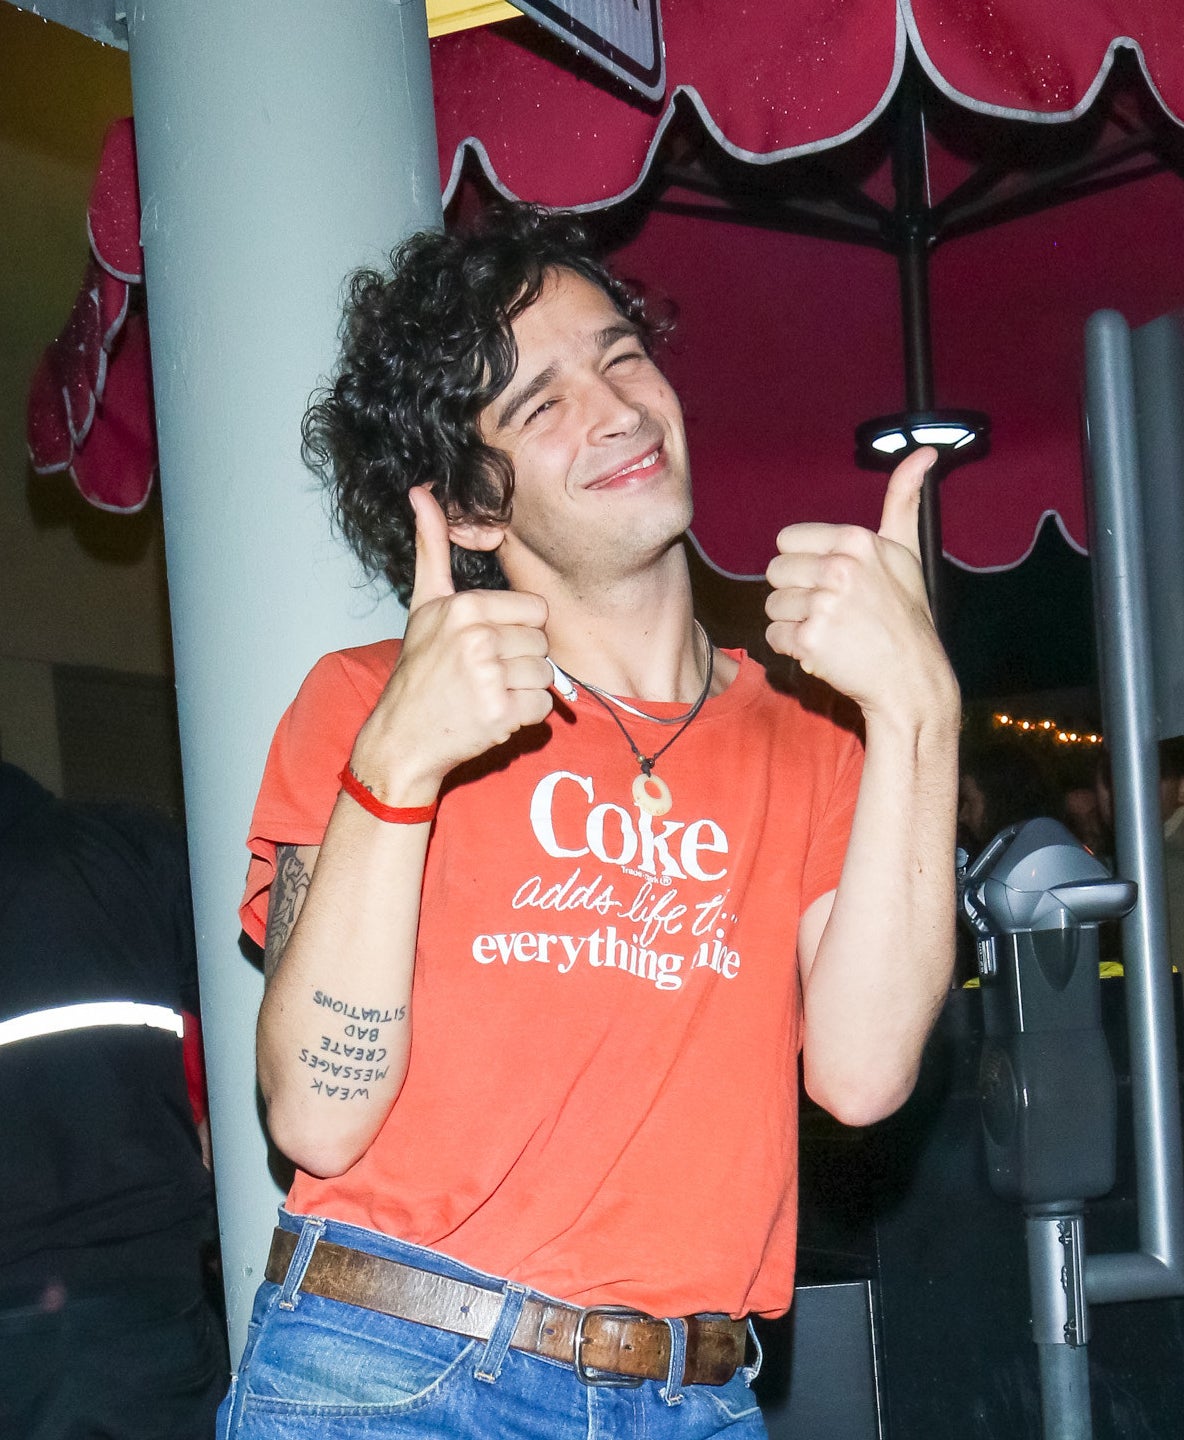 Close-up of Matty smiling, wearing a &quot;Coke adds life to everything nice&quot; T-shirt, and giving two thumbs-up